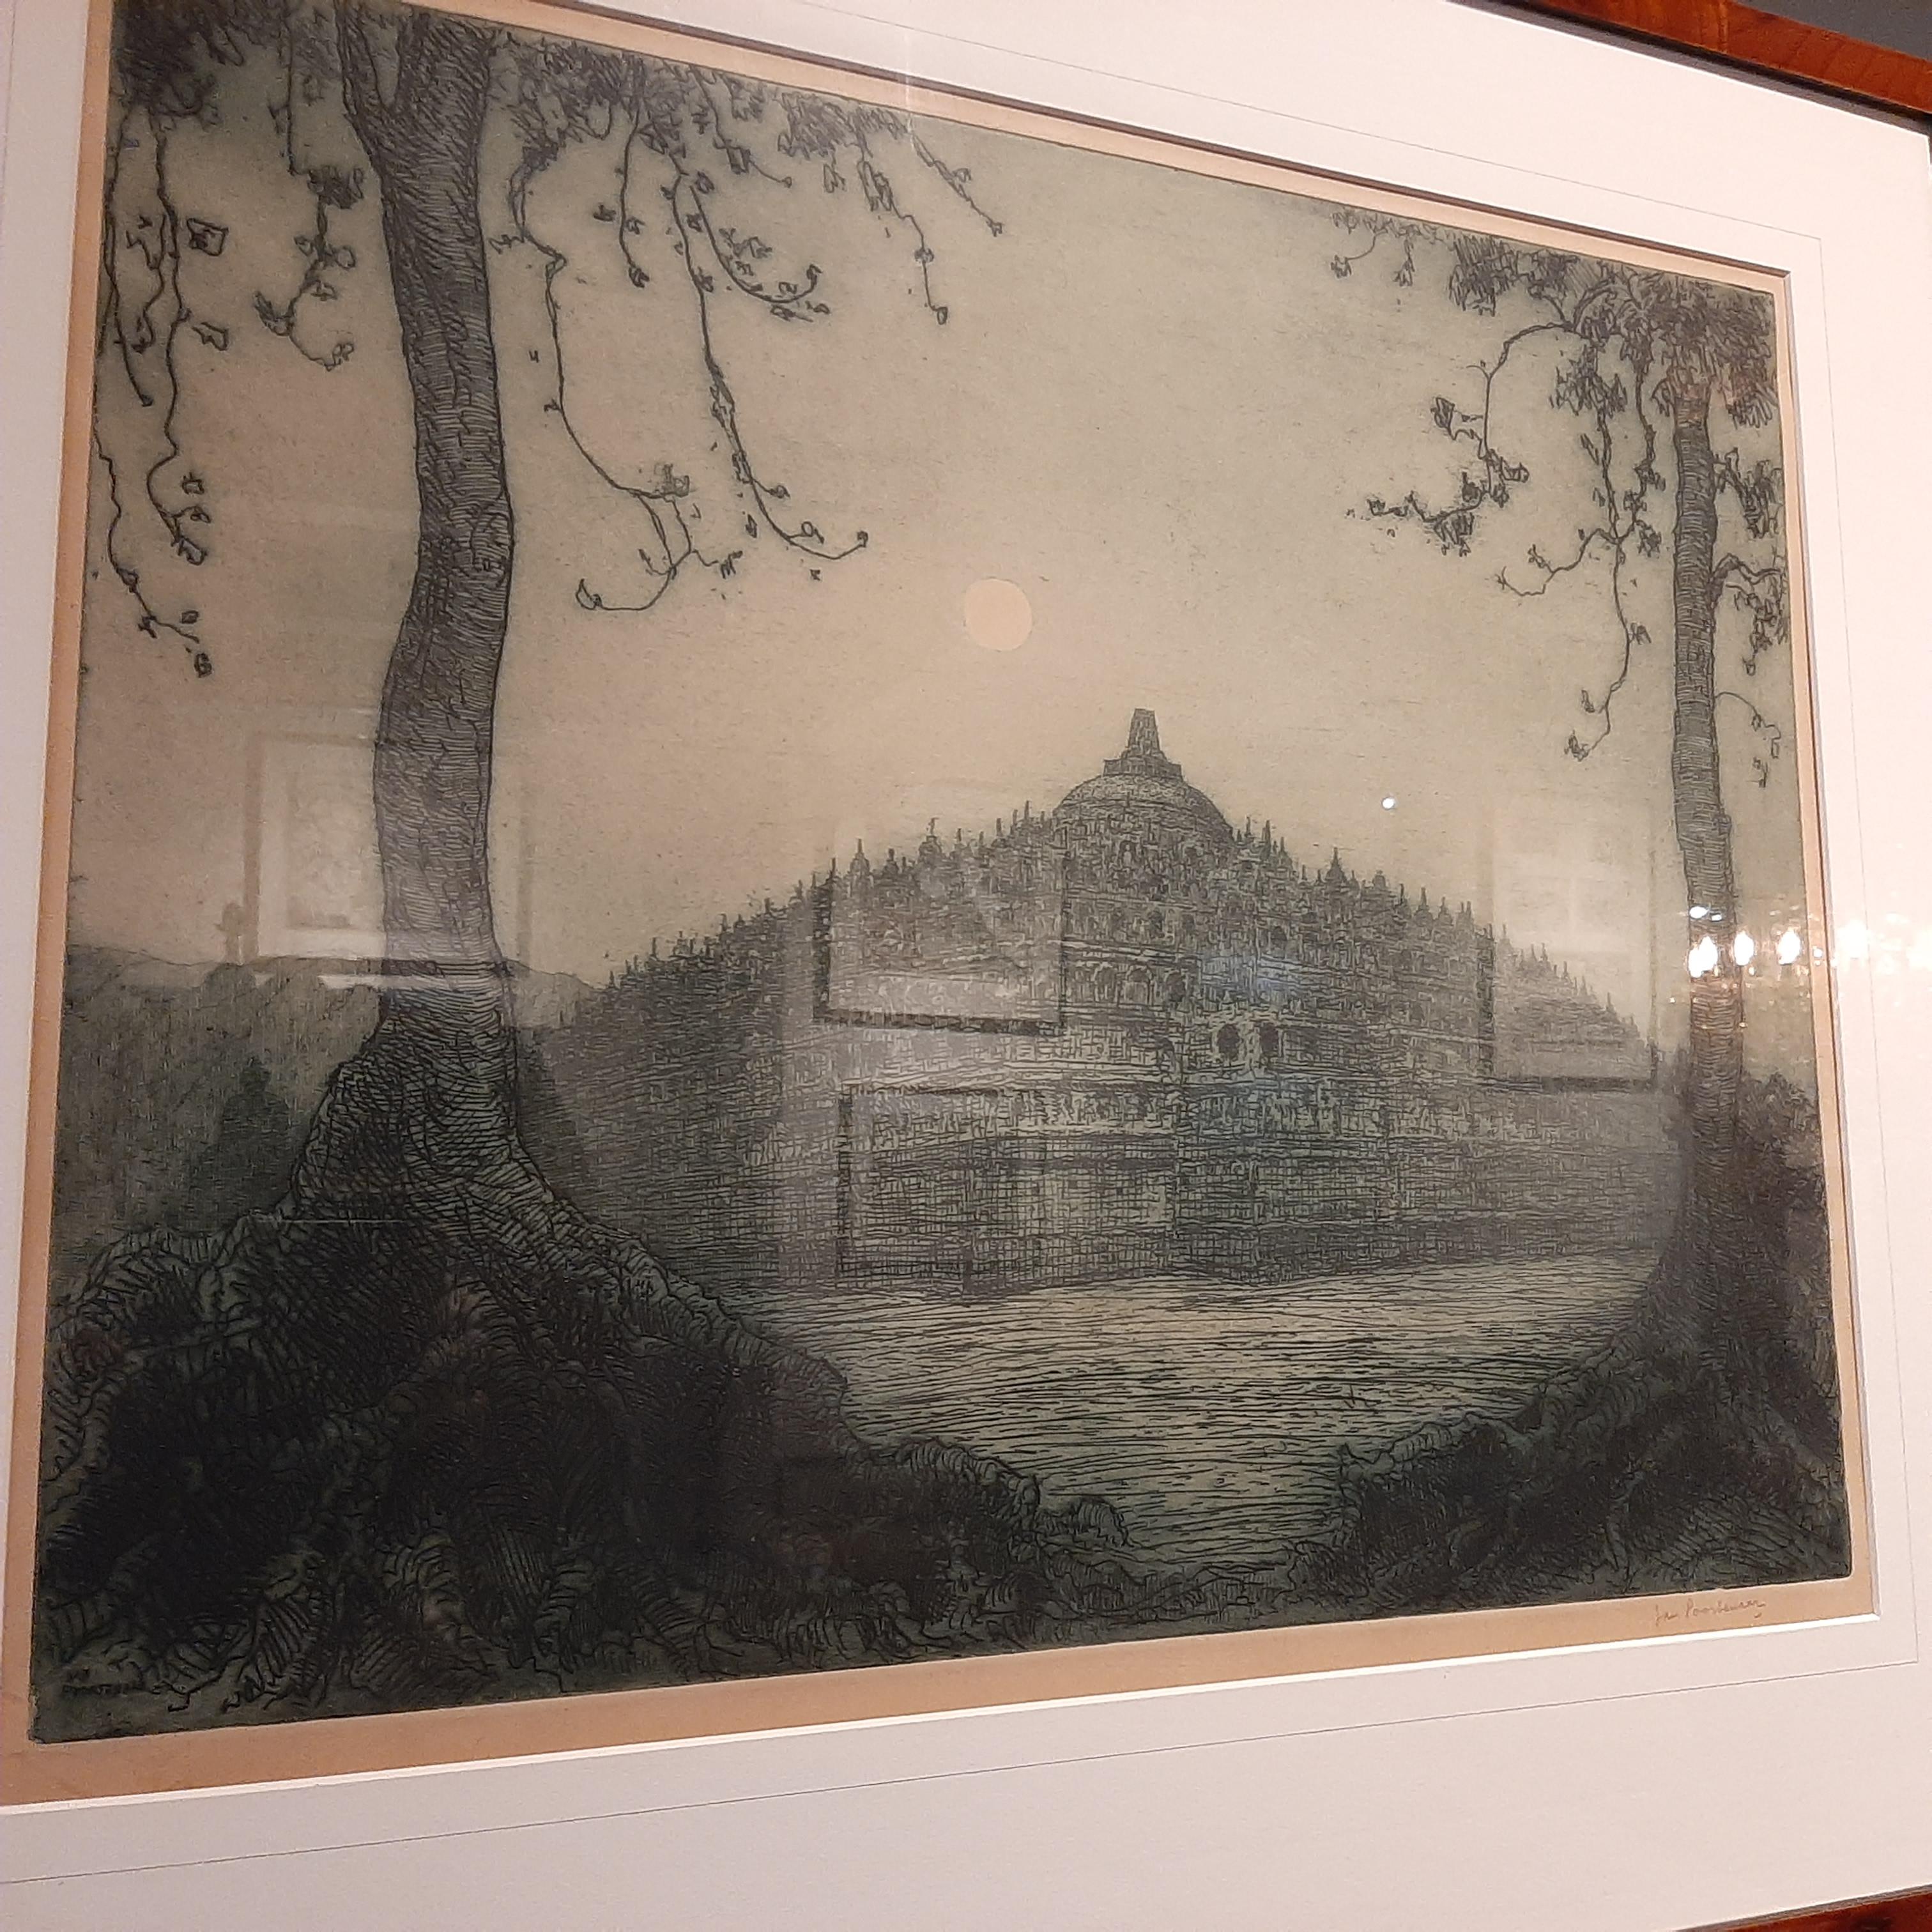 Signed etching by Jan Christian Poortenaar of the full moon at Borobudur, Java, Indonesia.

Frame included. We carefully pack our framed items to ensure safe shipping.